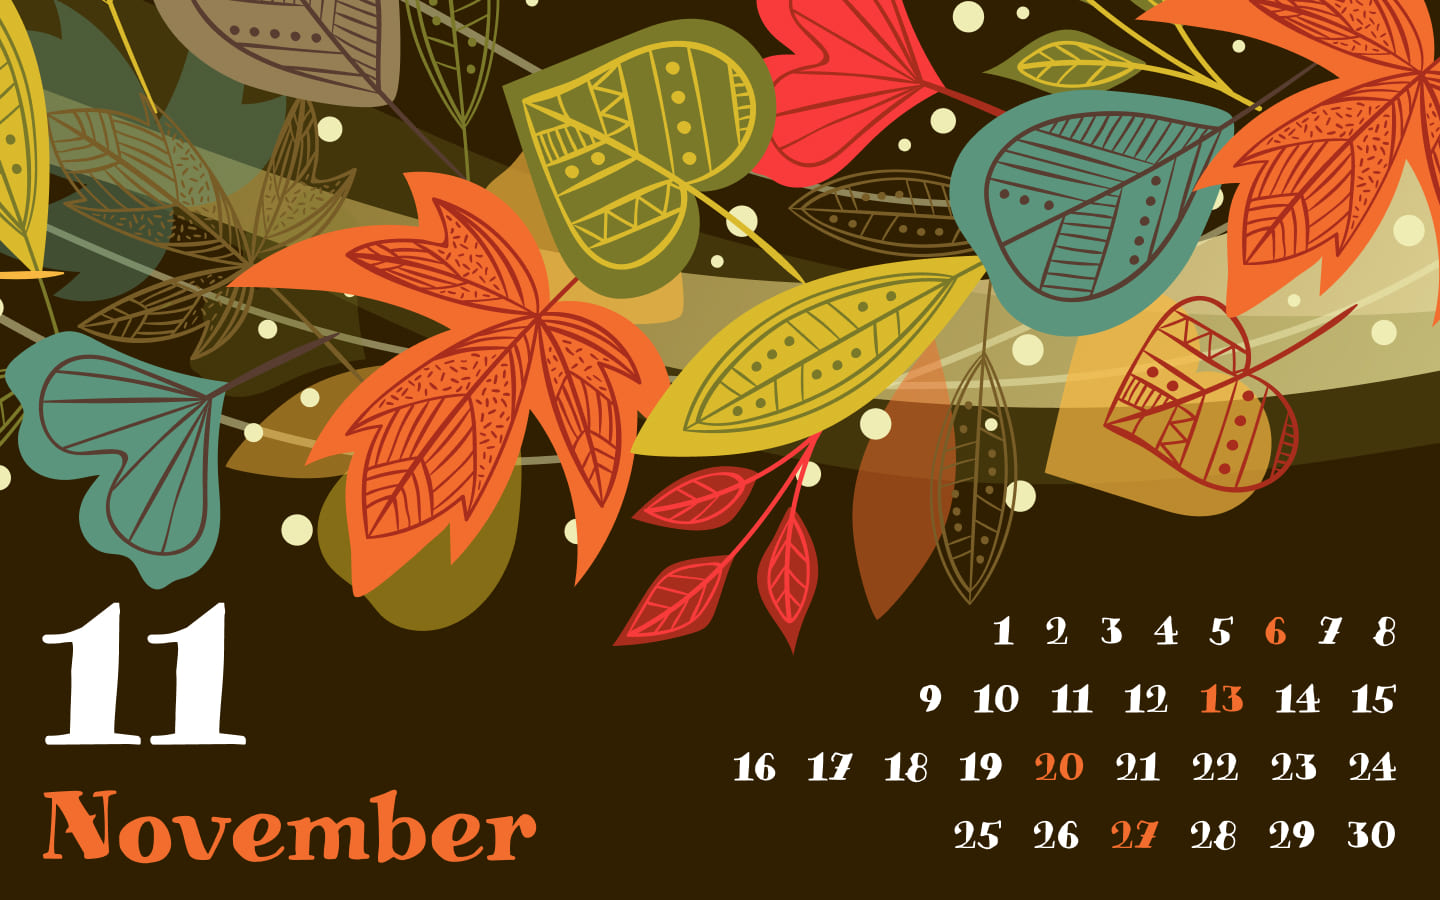 Eleventh page of the calendar for November in brown close up.